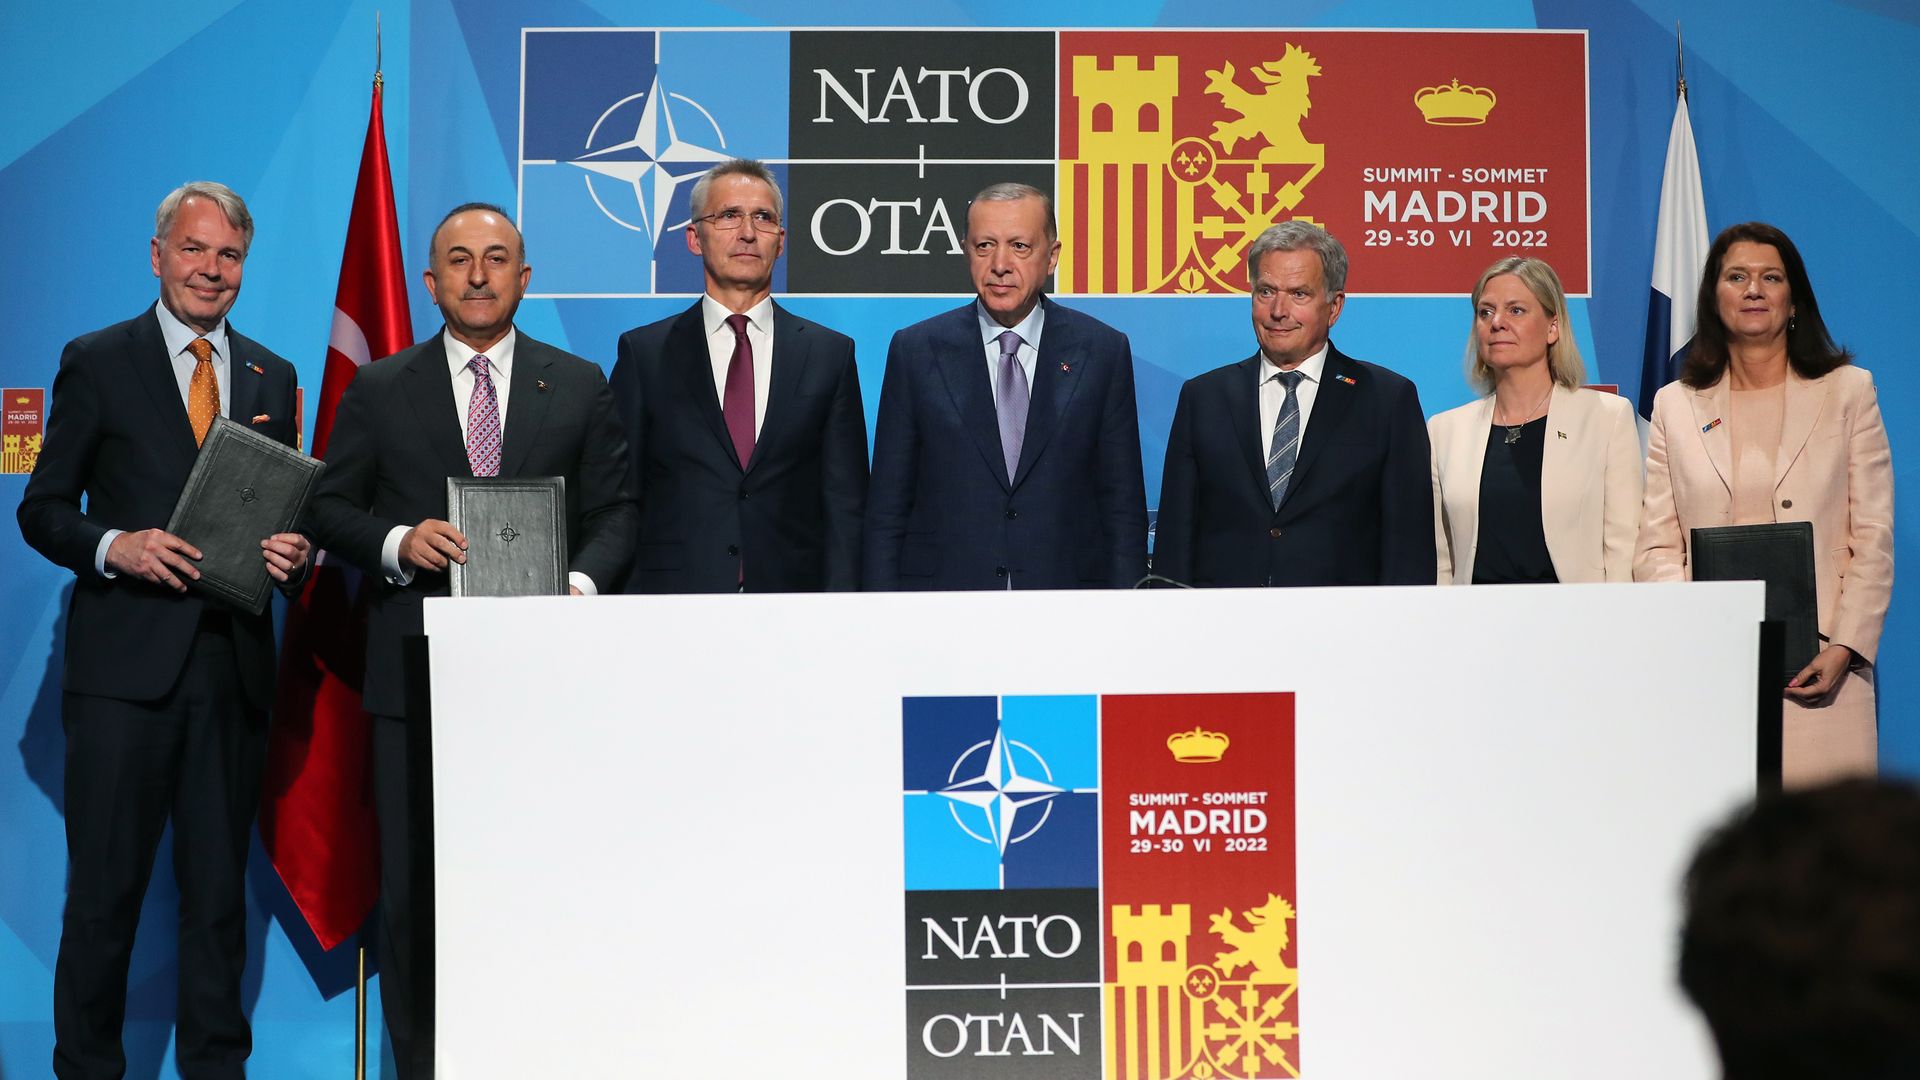 NATO Secretary General and leaders from Turkey, Finland and Sweden attend a signing ceremony of a memorandum on the Nordic countries' bids for NATO membership